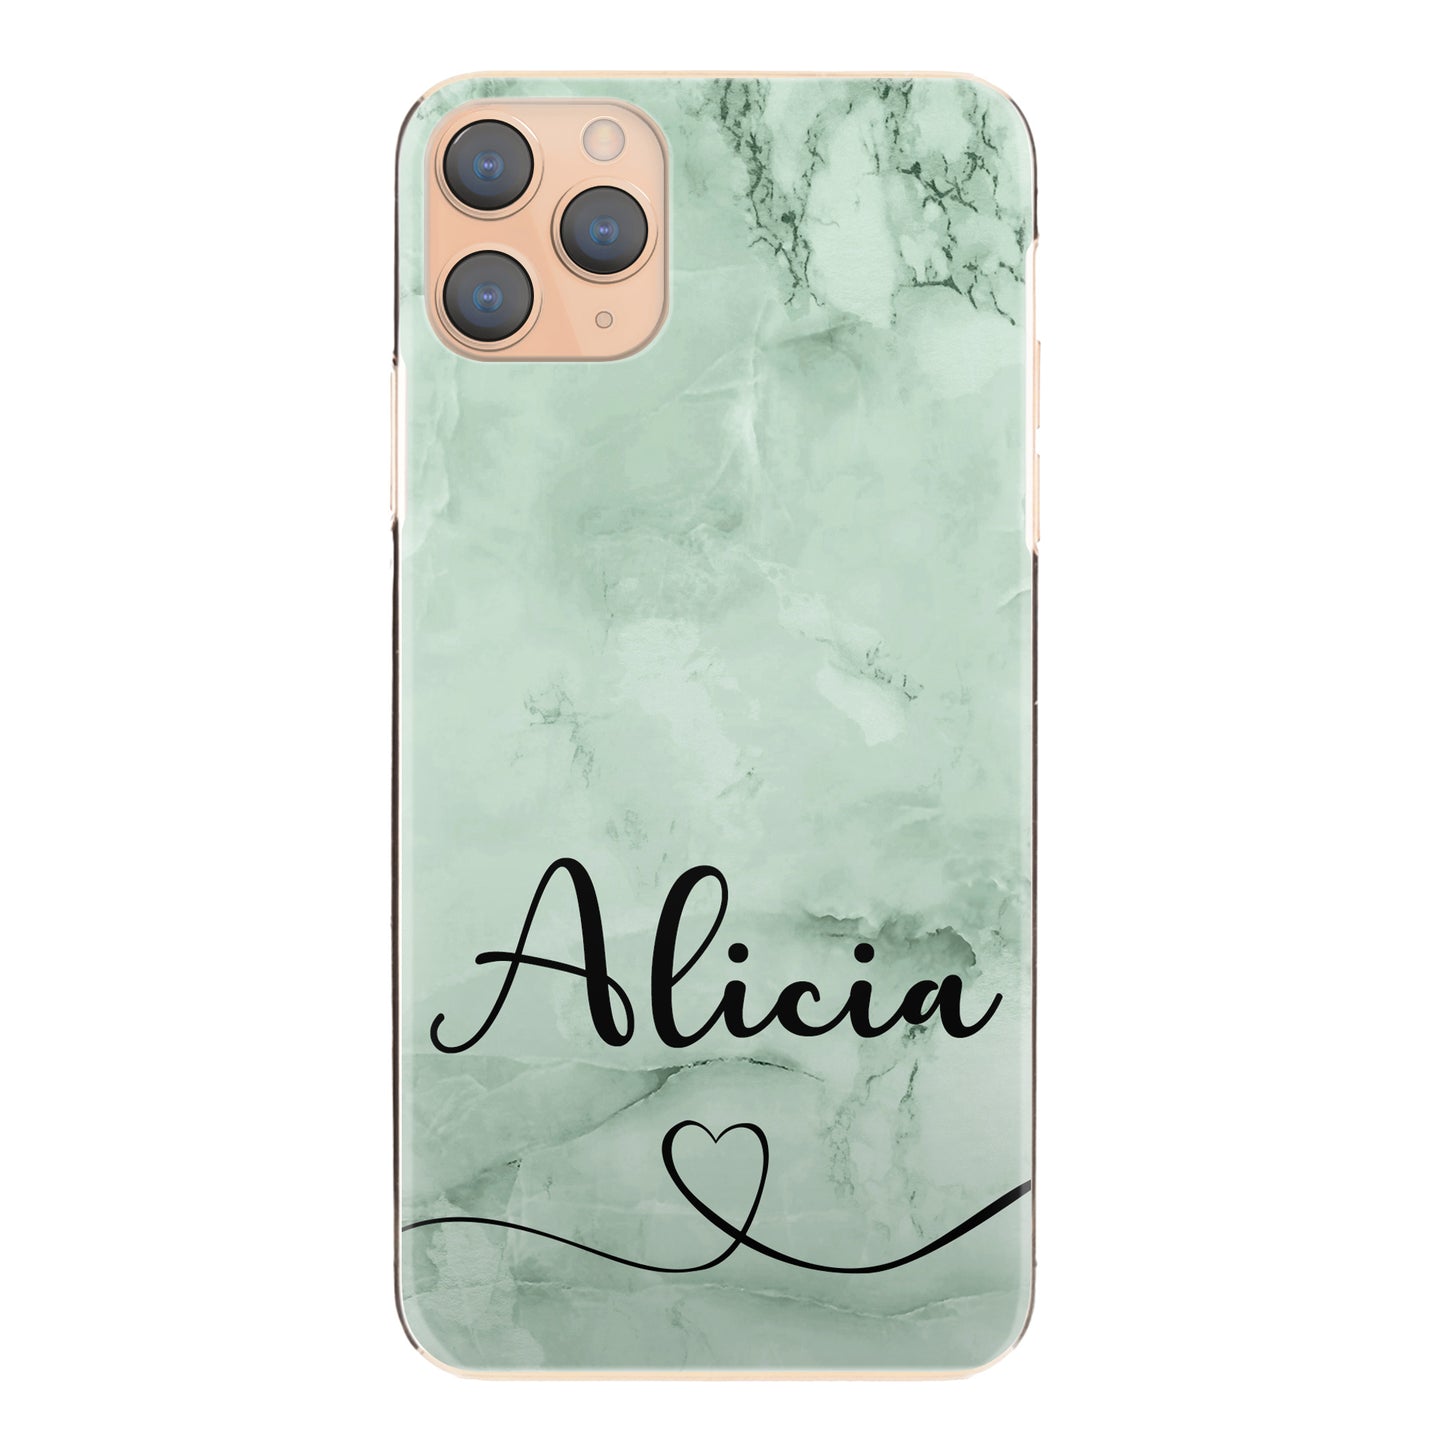 Personalised Xiaomi Phone Hard Case with Heart Accented Stylish Text on Mint Green Marble